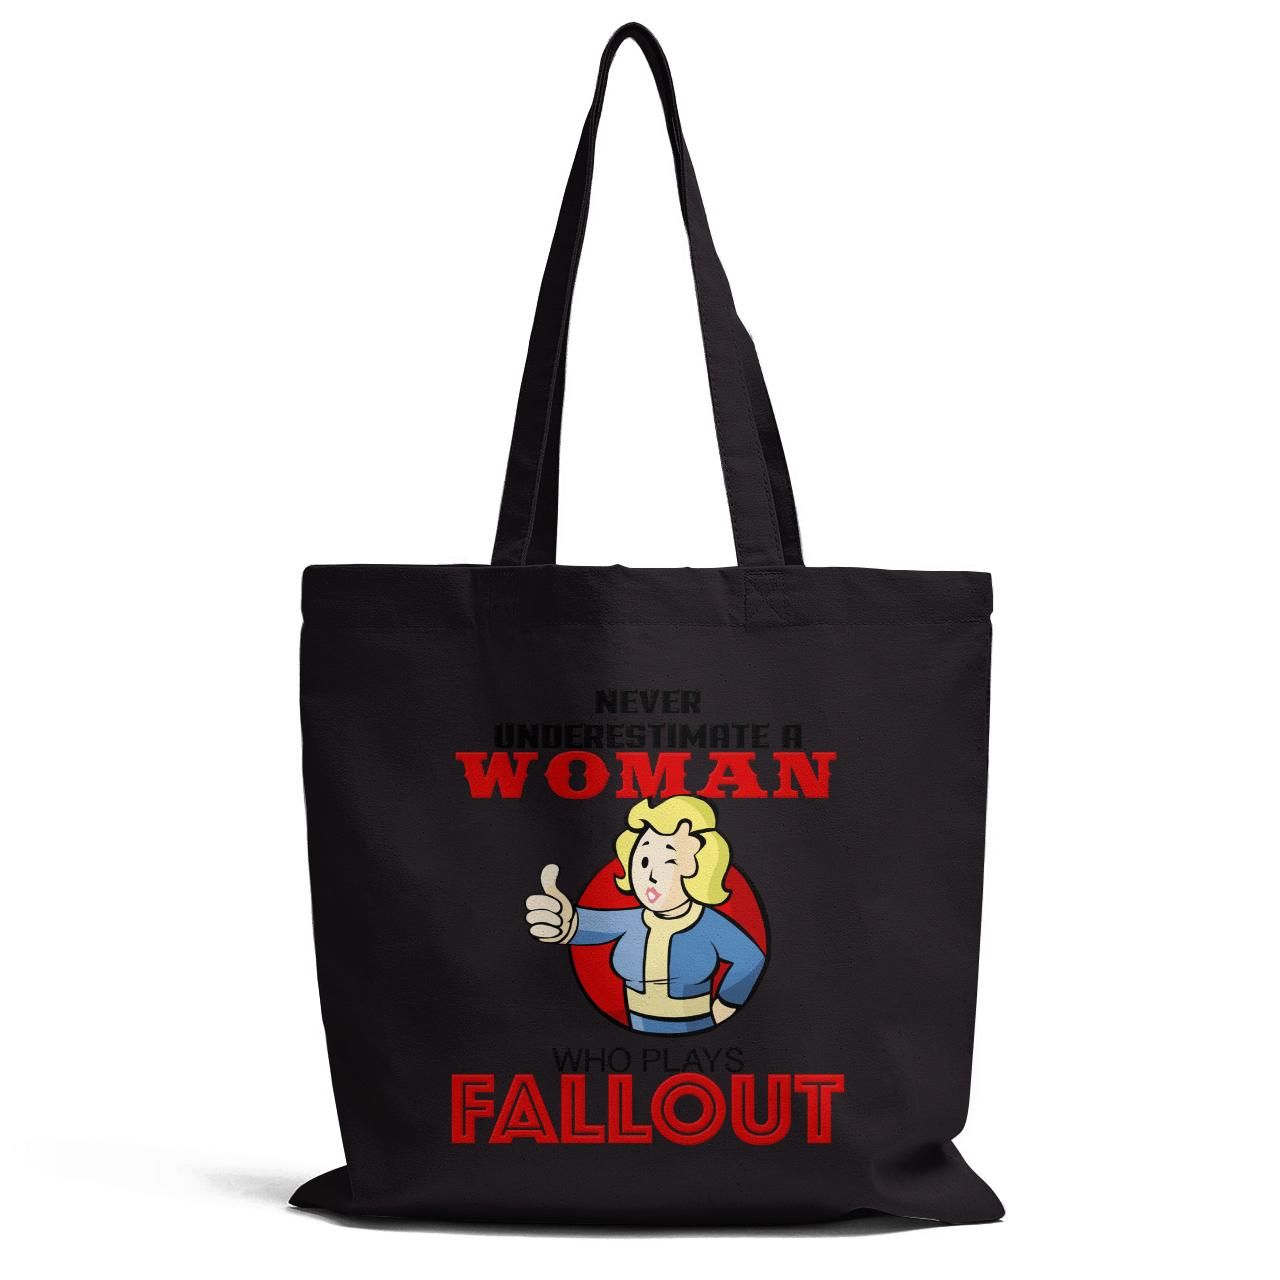 Never Understimate A Woman Who Plays Fallout Tote Bag